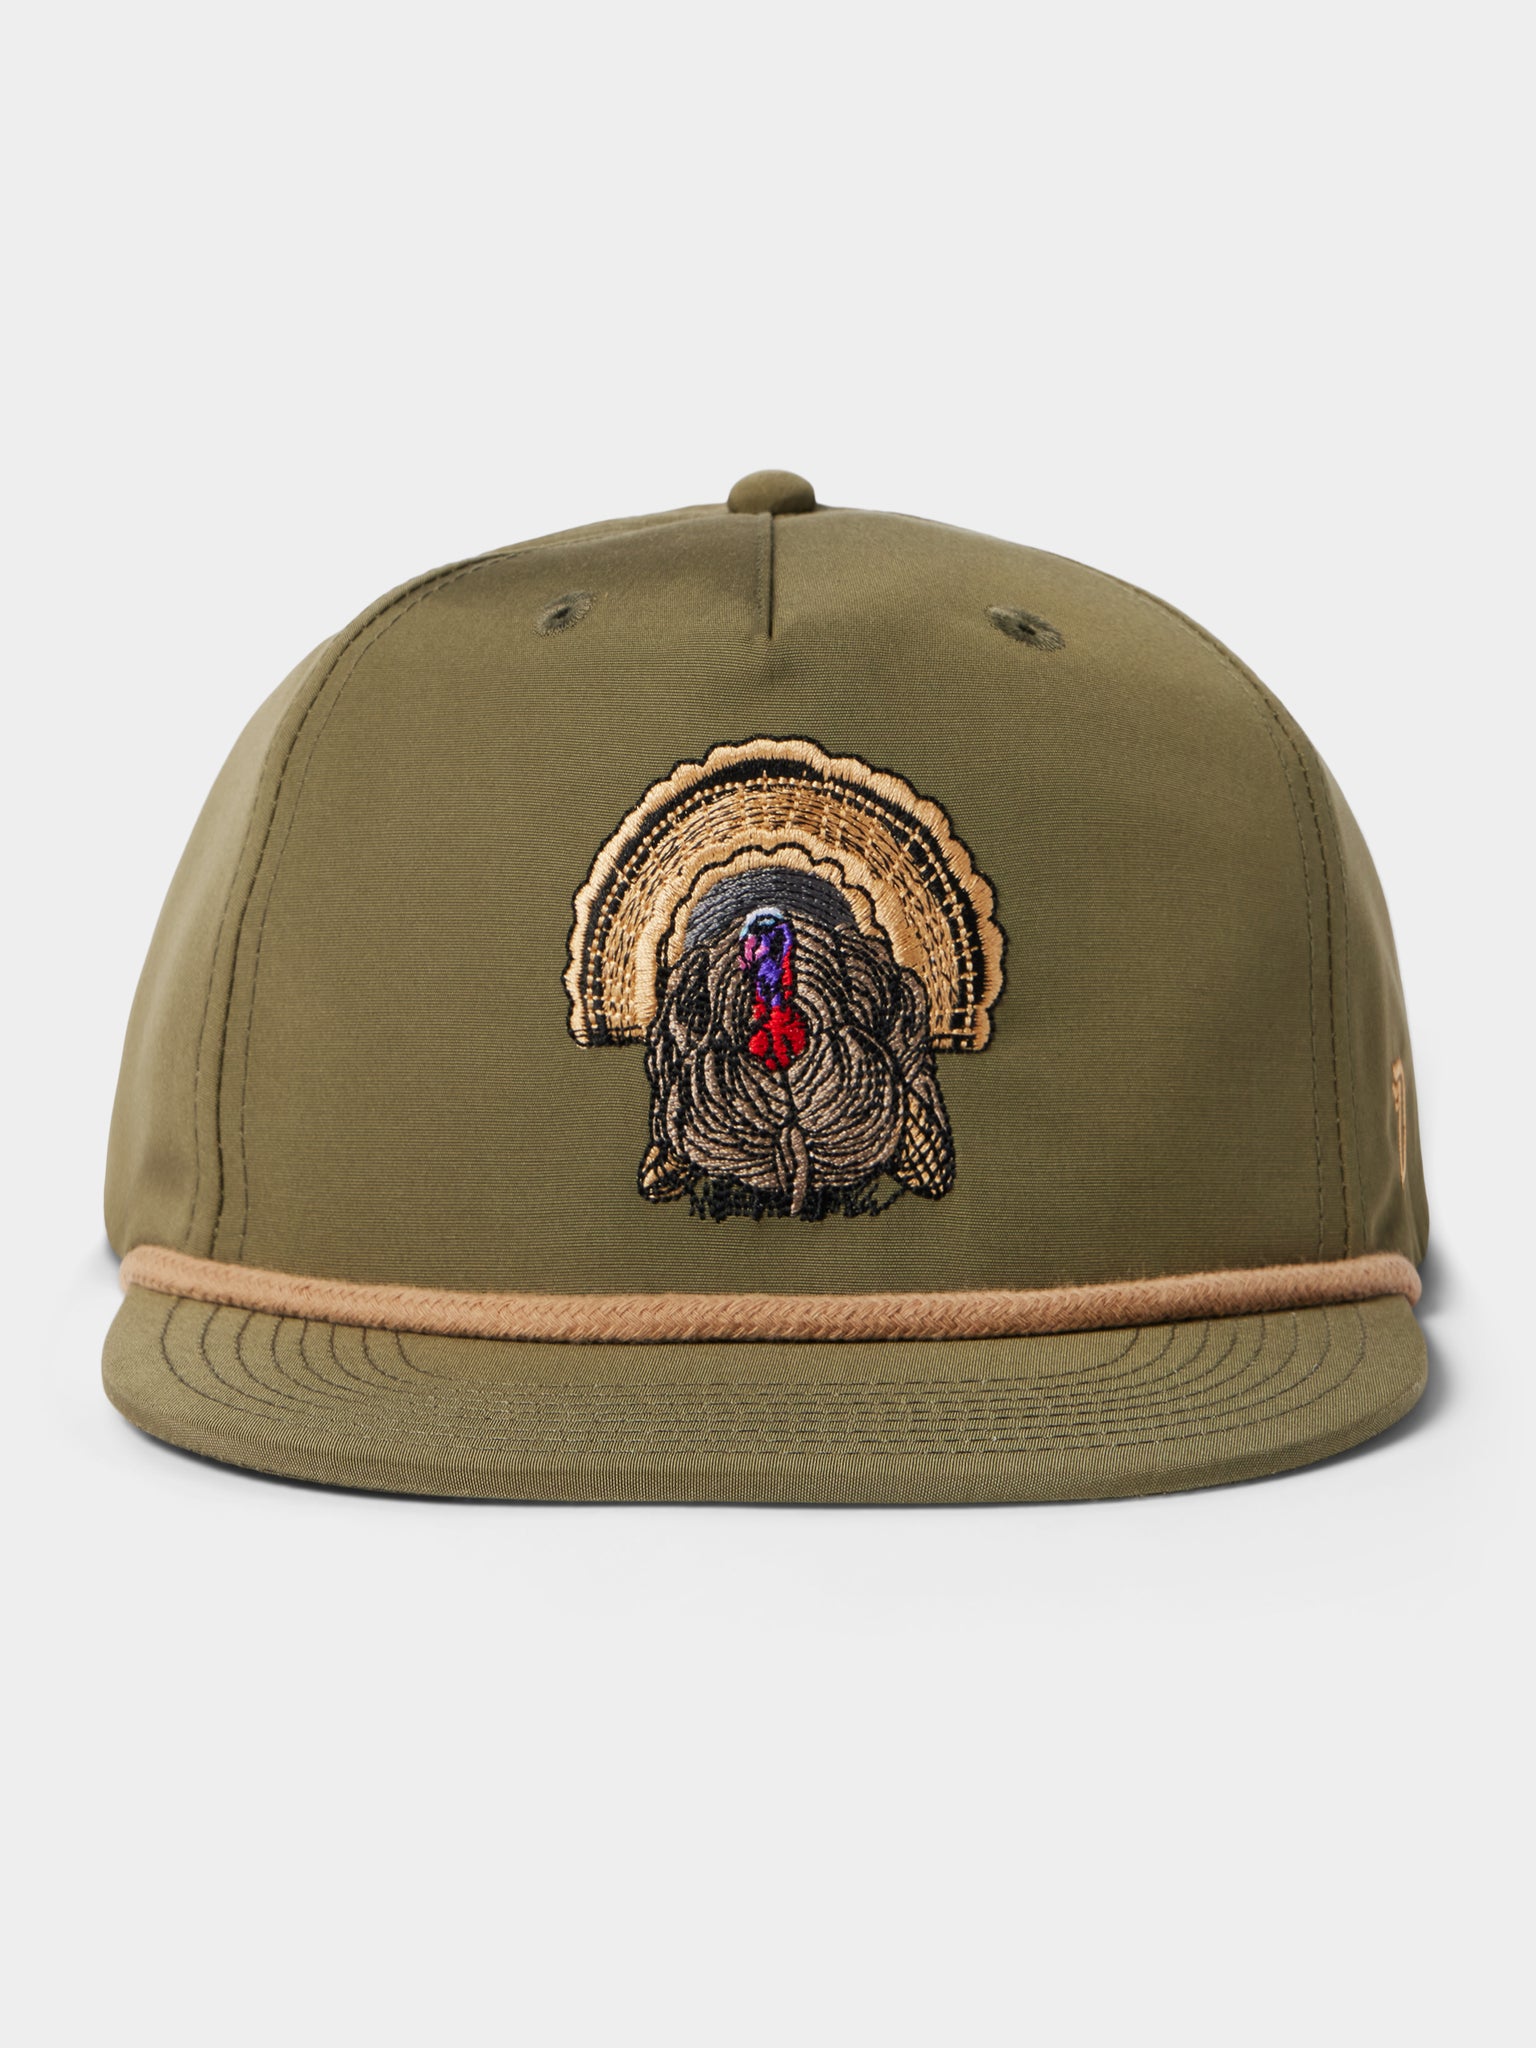 Hunting and Fishing Hats – Duck Camp